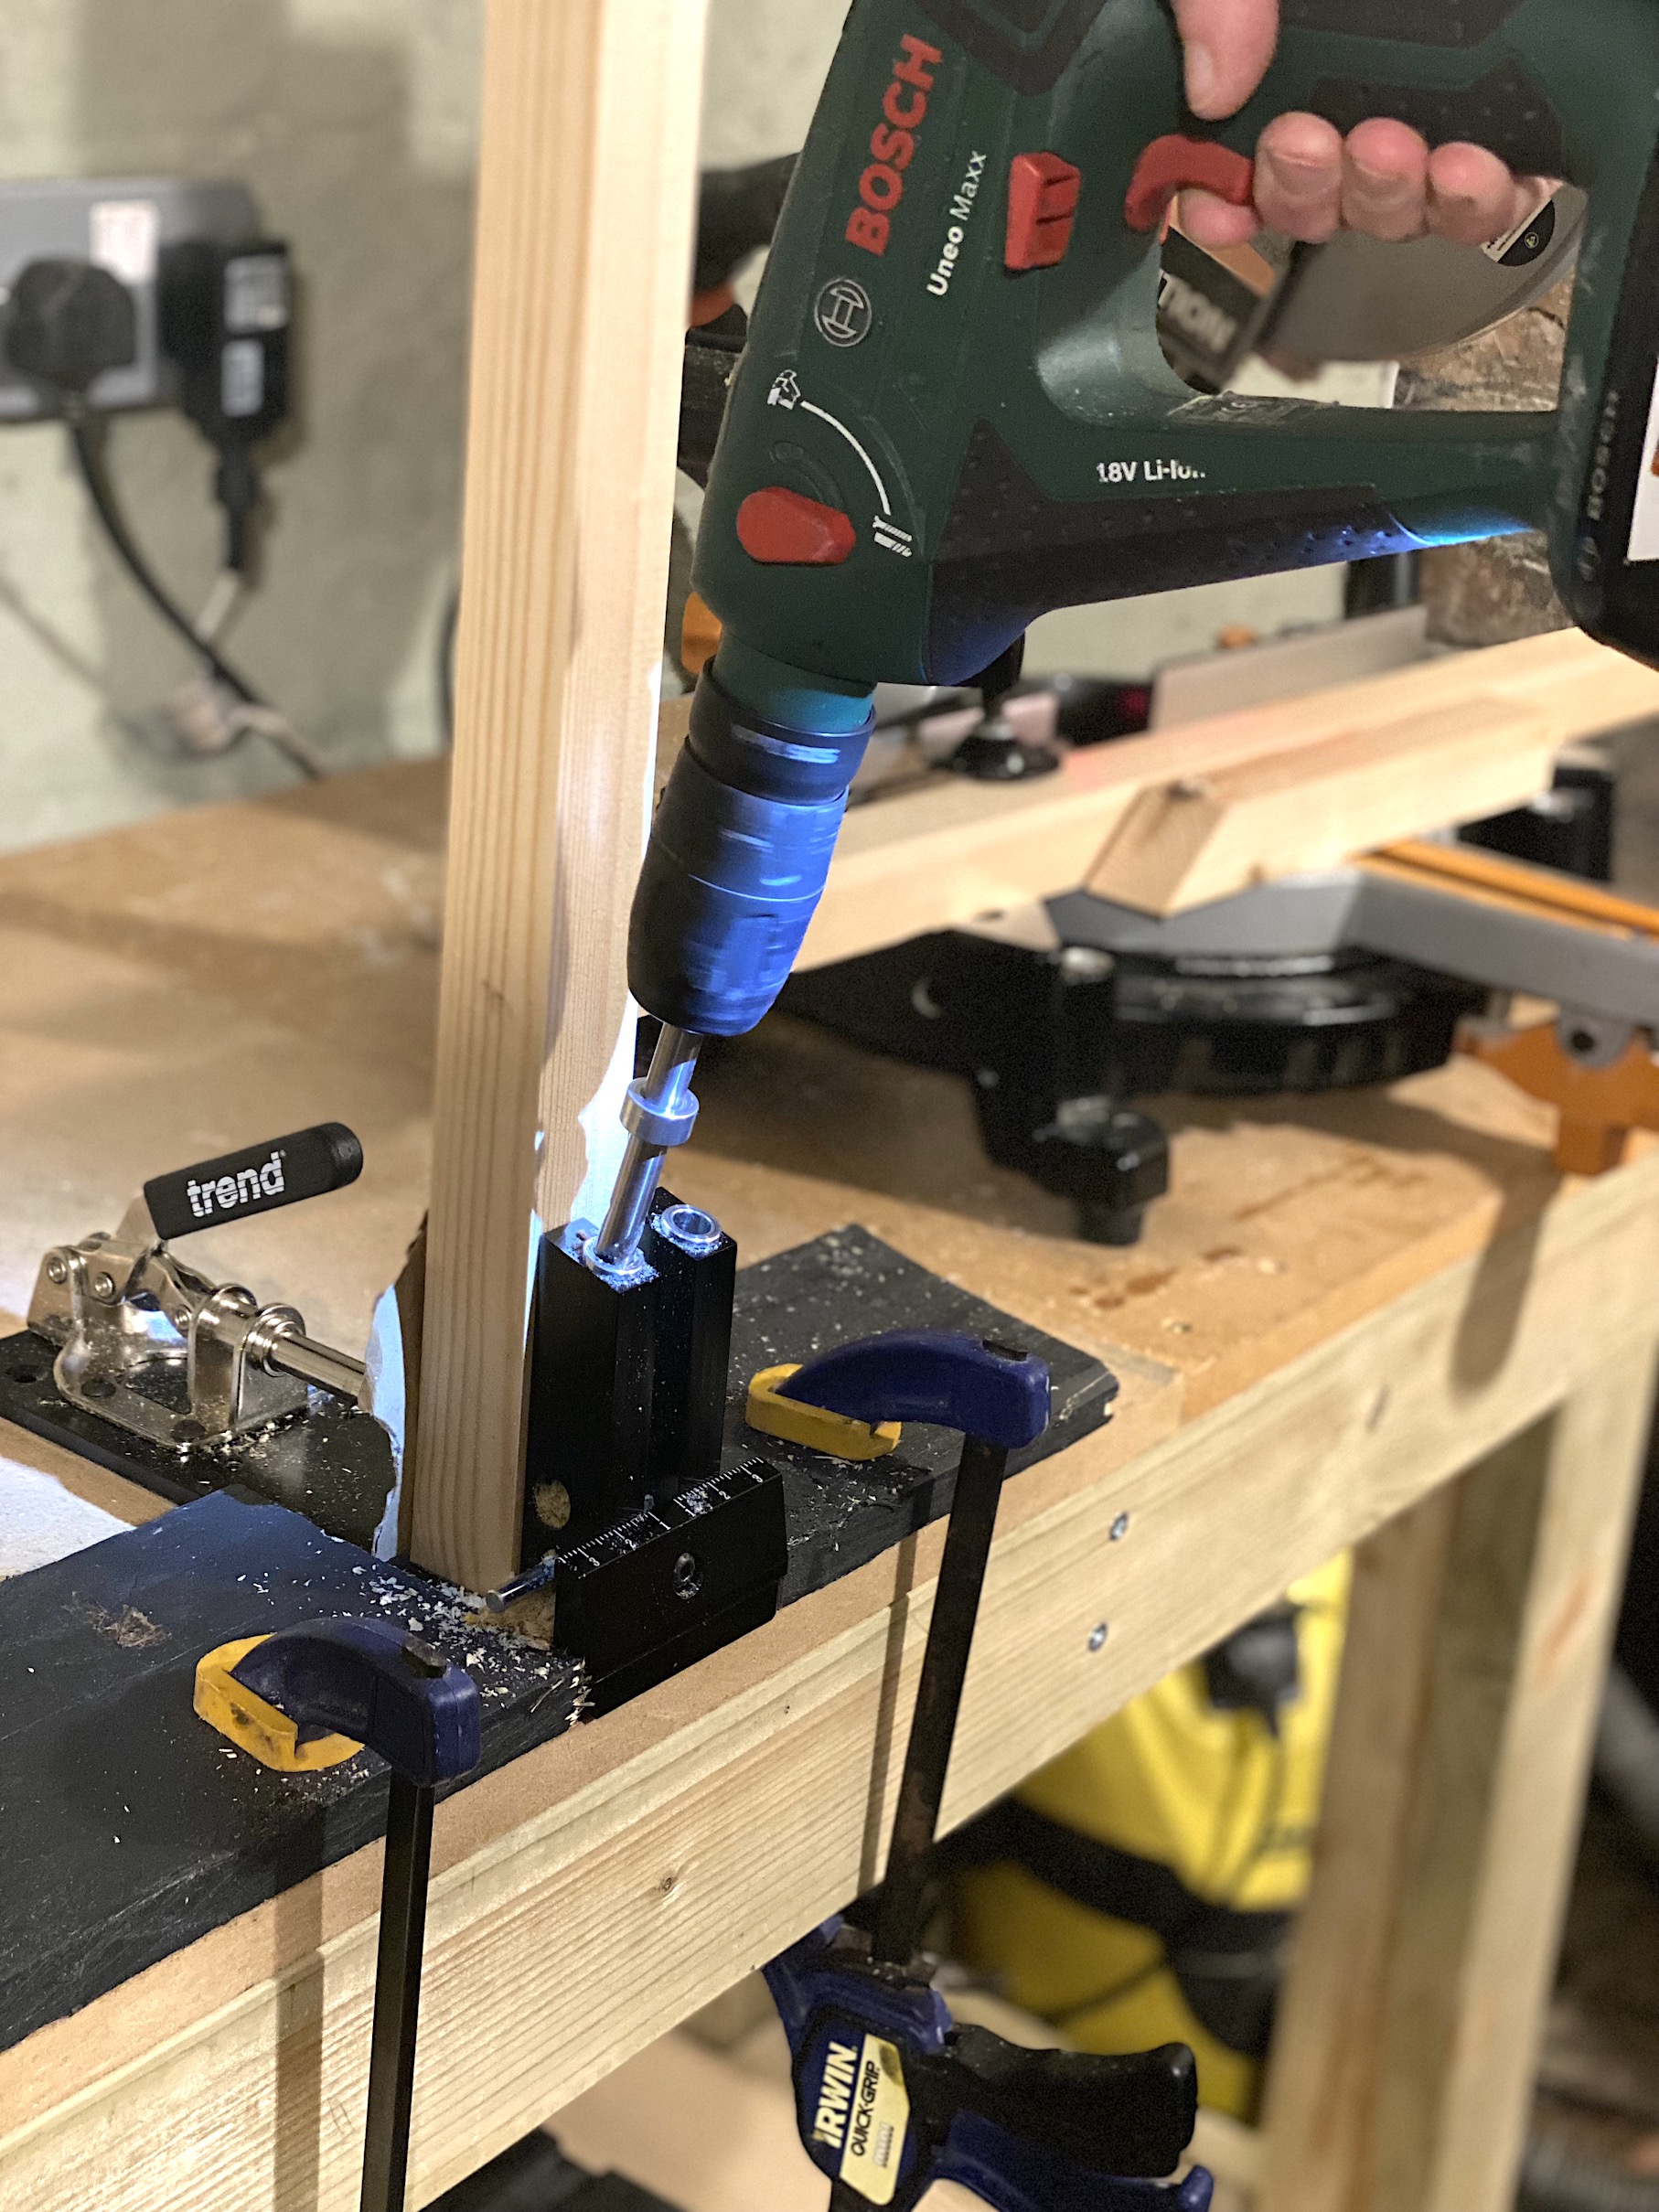 DIY project with pocket jig